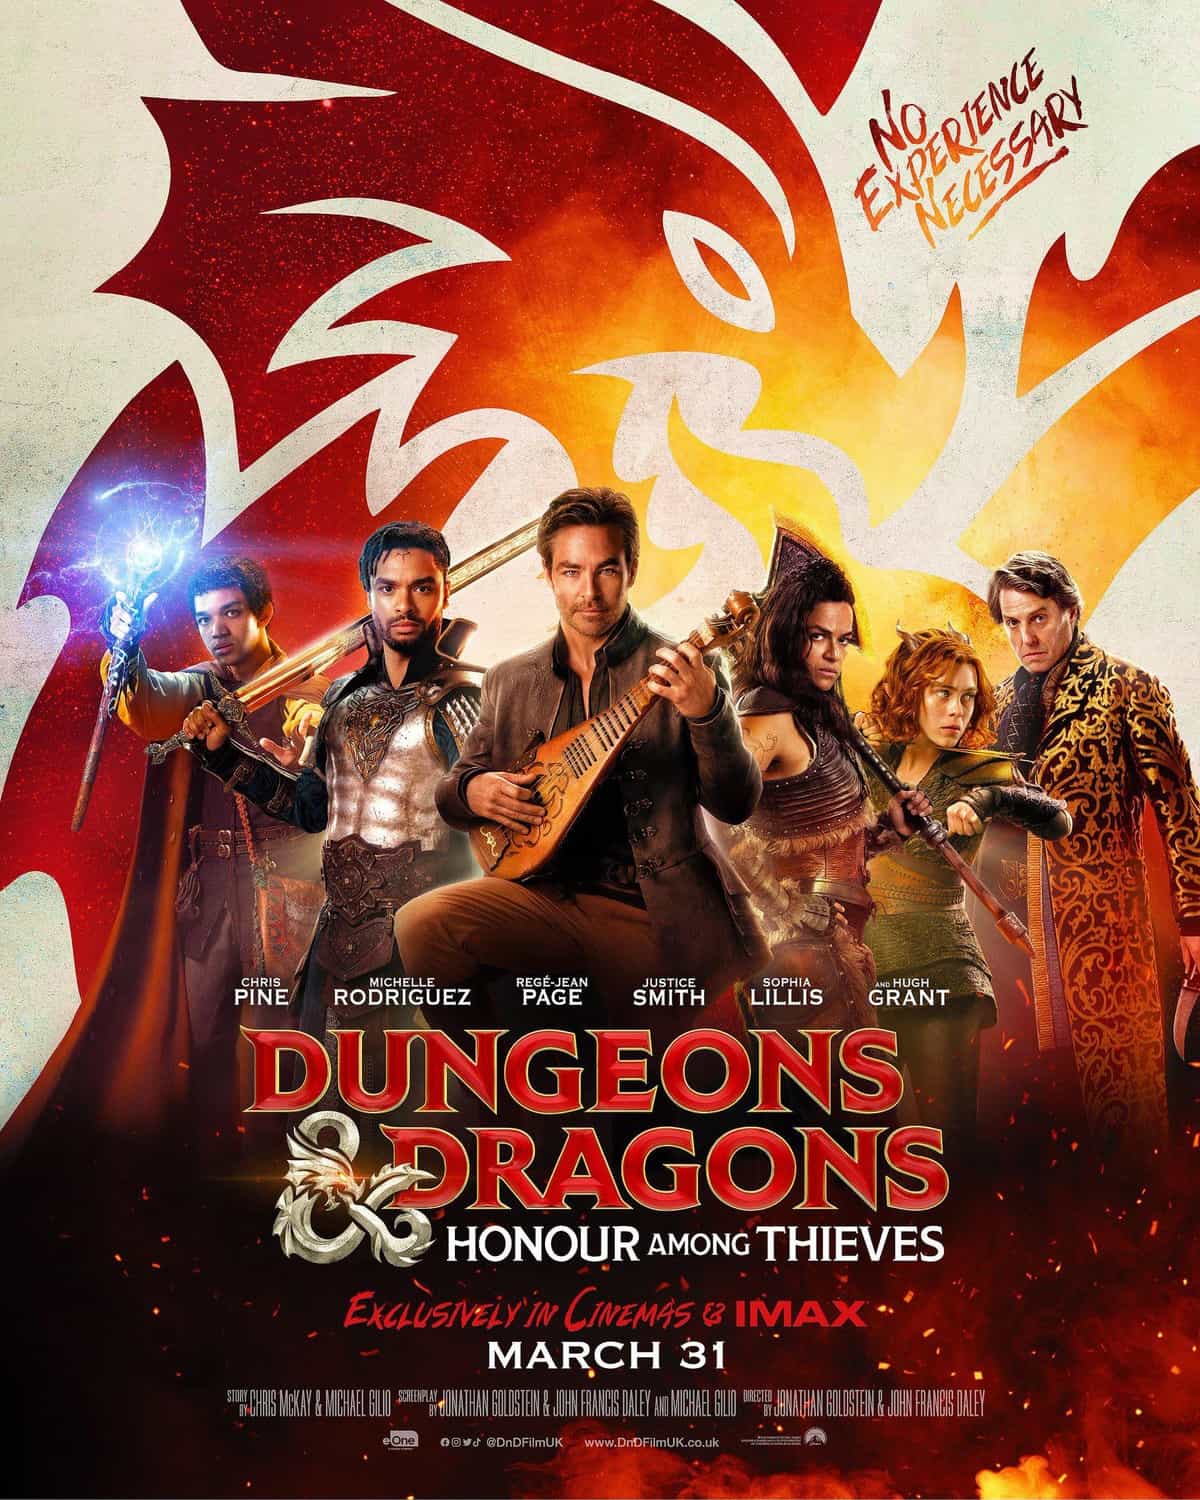 Dungeons & Dragons: Honour Among Thieves is given a 12 age rating in the UK for moderate violence, threat, horror, language